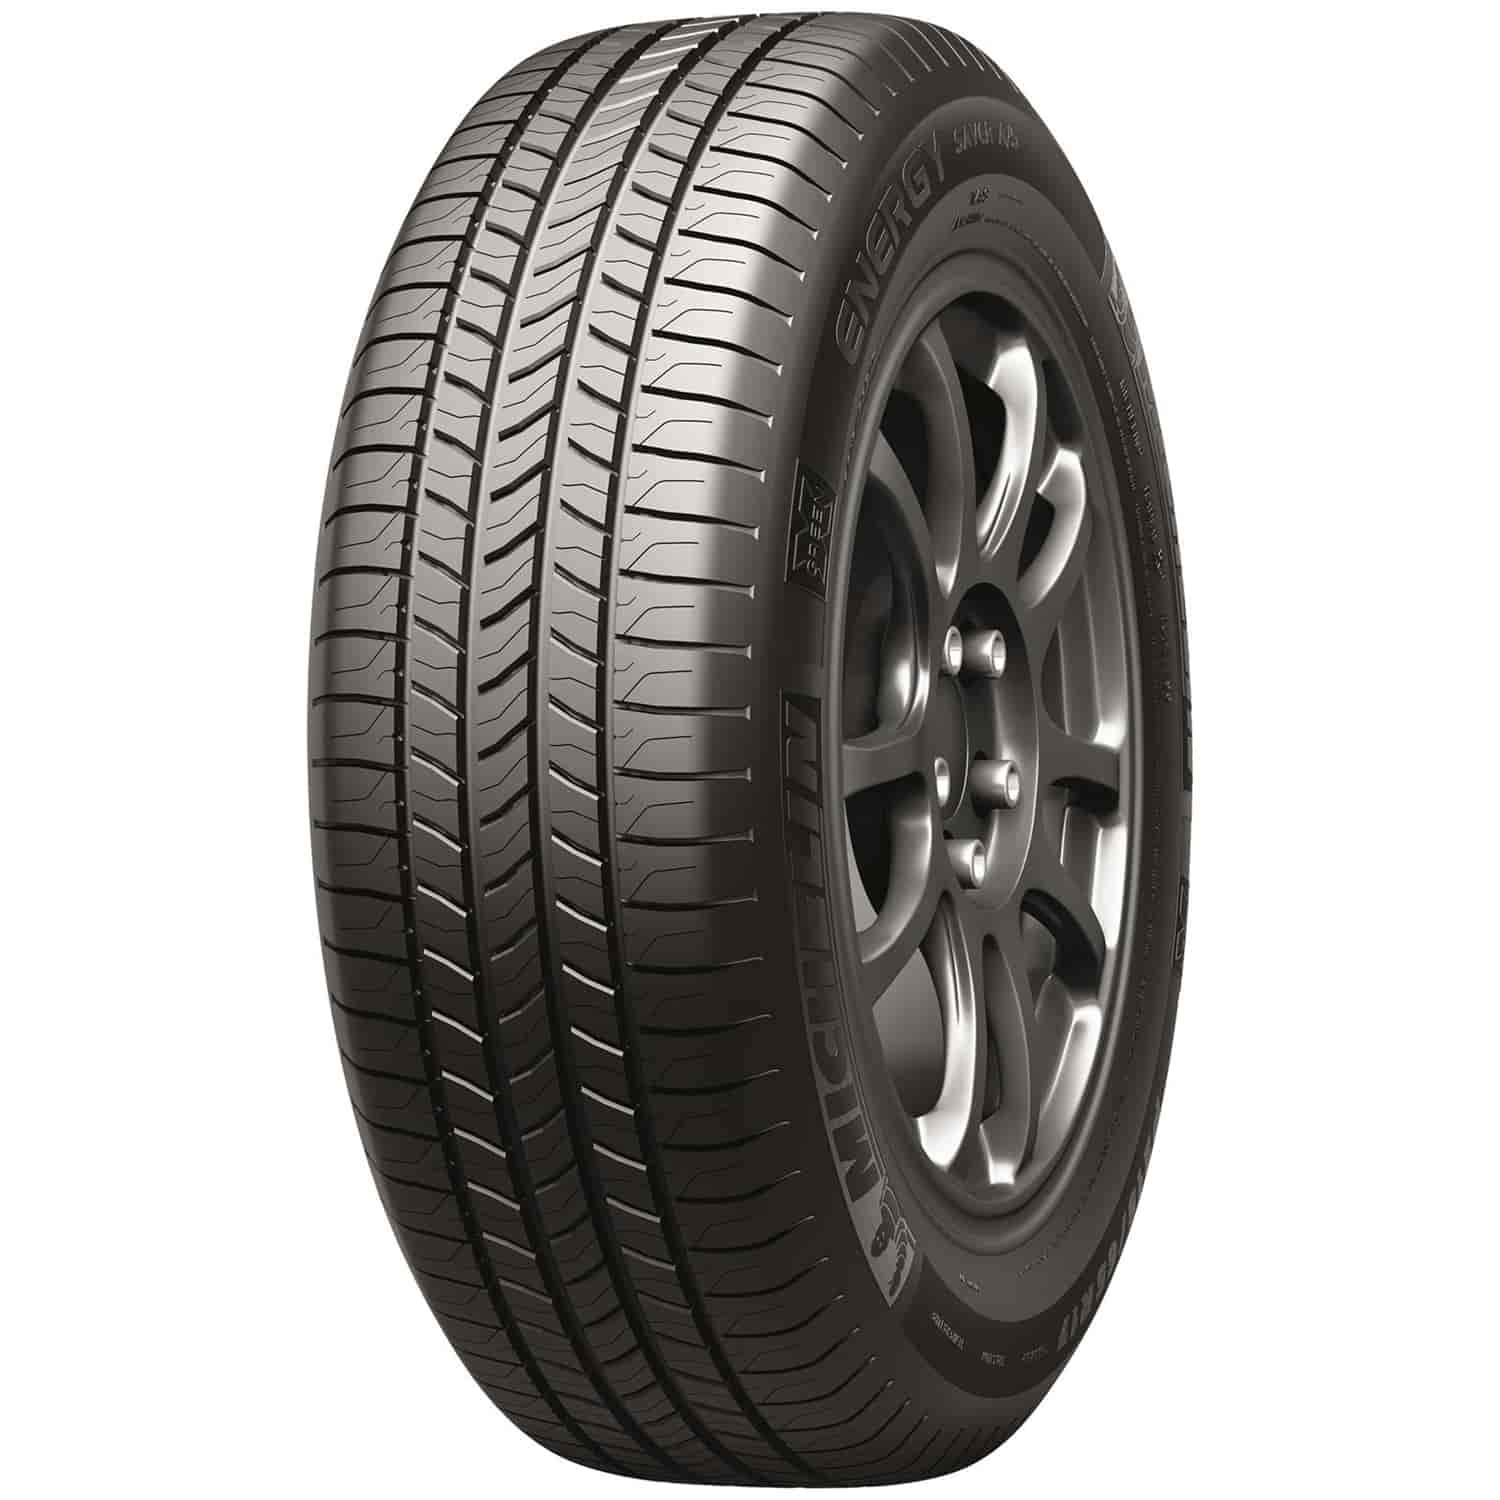 Energy Saver A/S 205/60R16 92H BSW